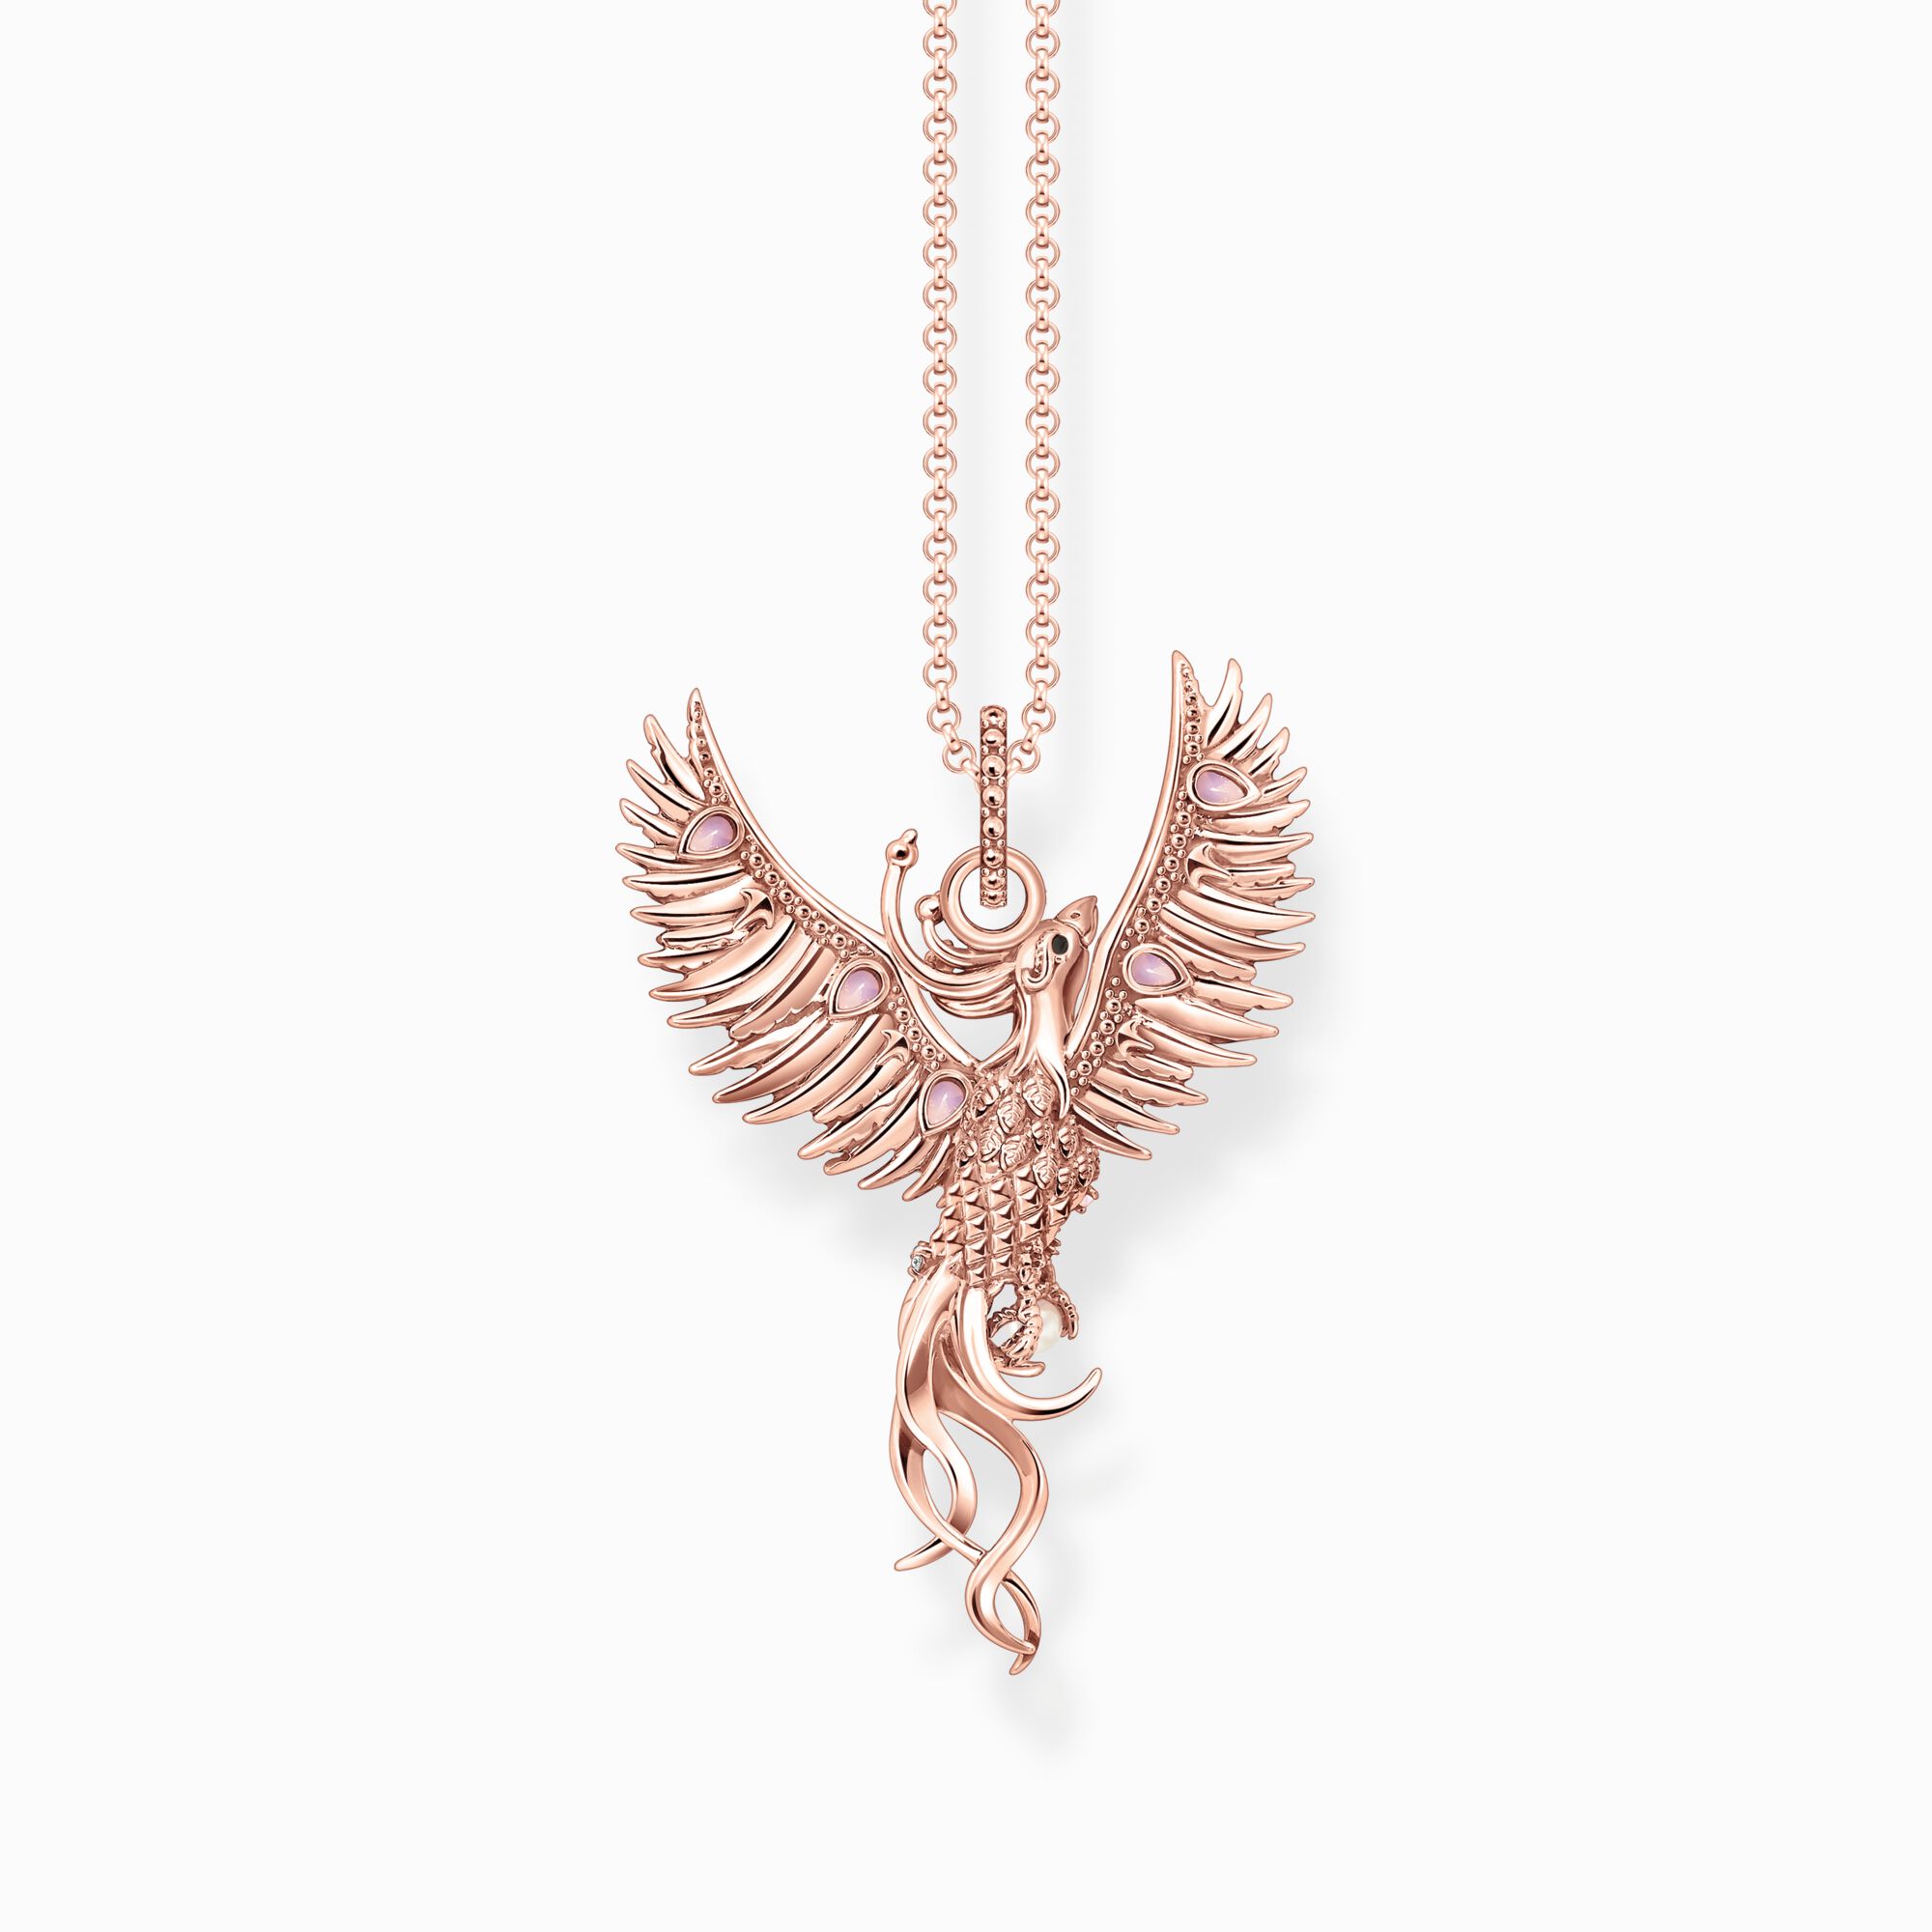 stones | various Rose-gold THOMAS necklace with plated SABO Phoenix and pendant